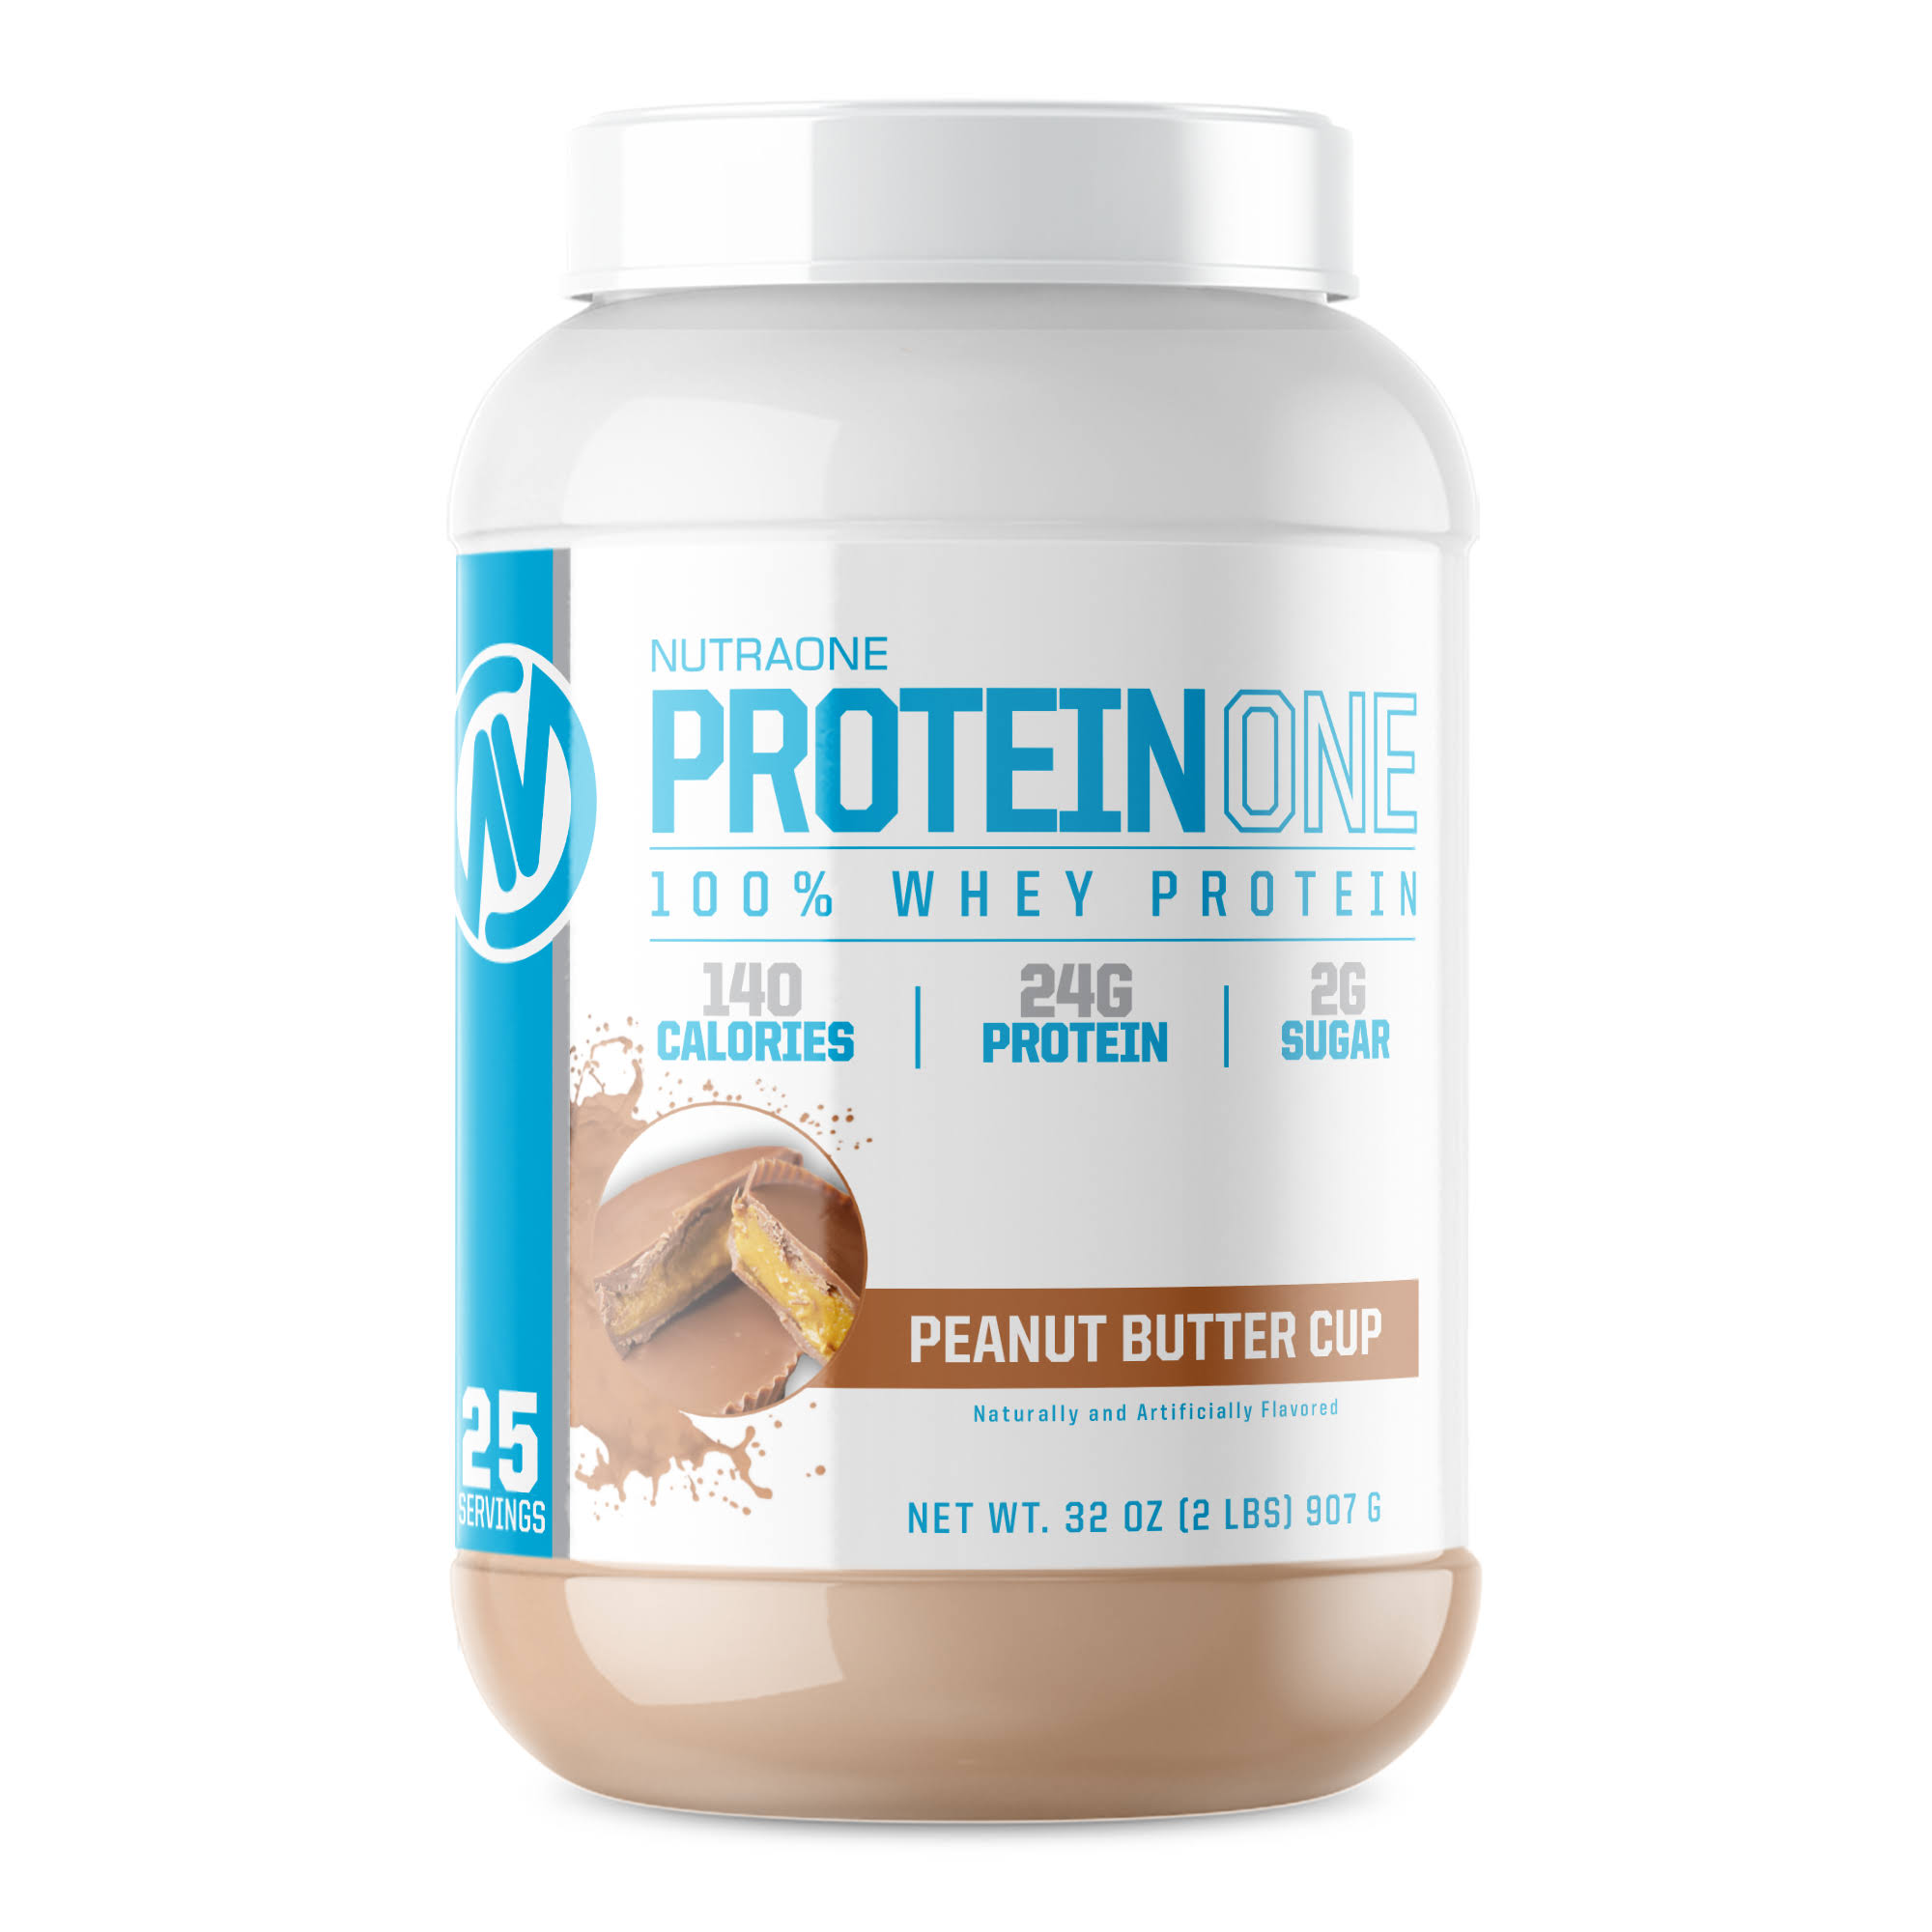 ProteinOne Whey Protein Powder by NutraOne Non GMO and Amino Acid Free Protein Powder Chocolate Peanut Butter Cup 2 lbs